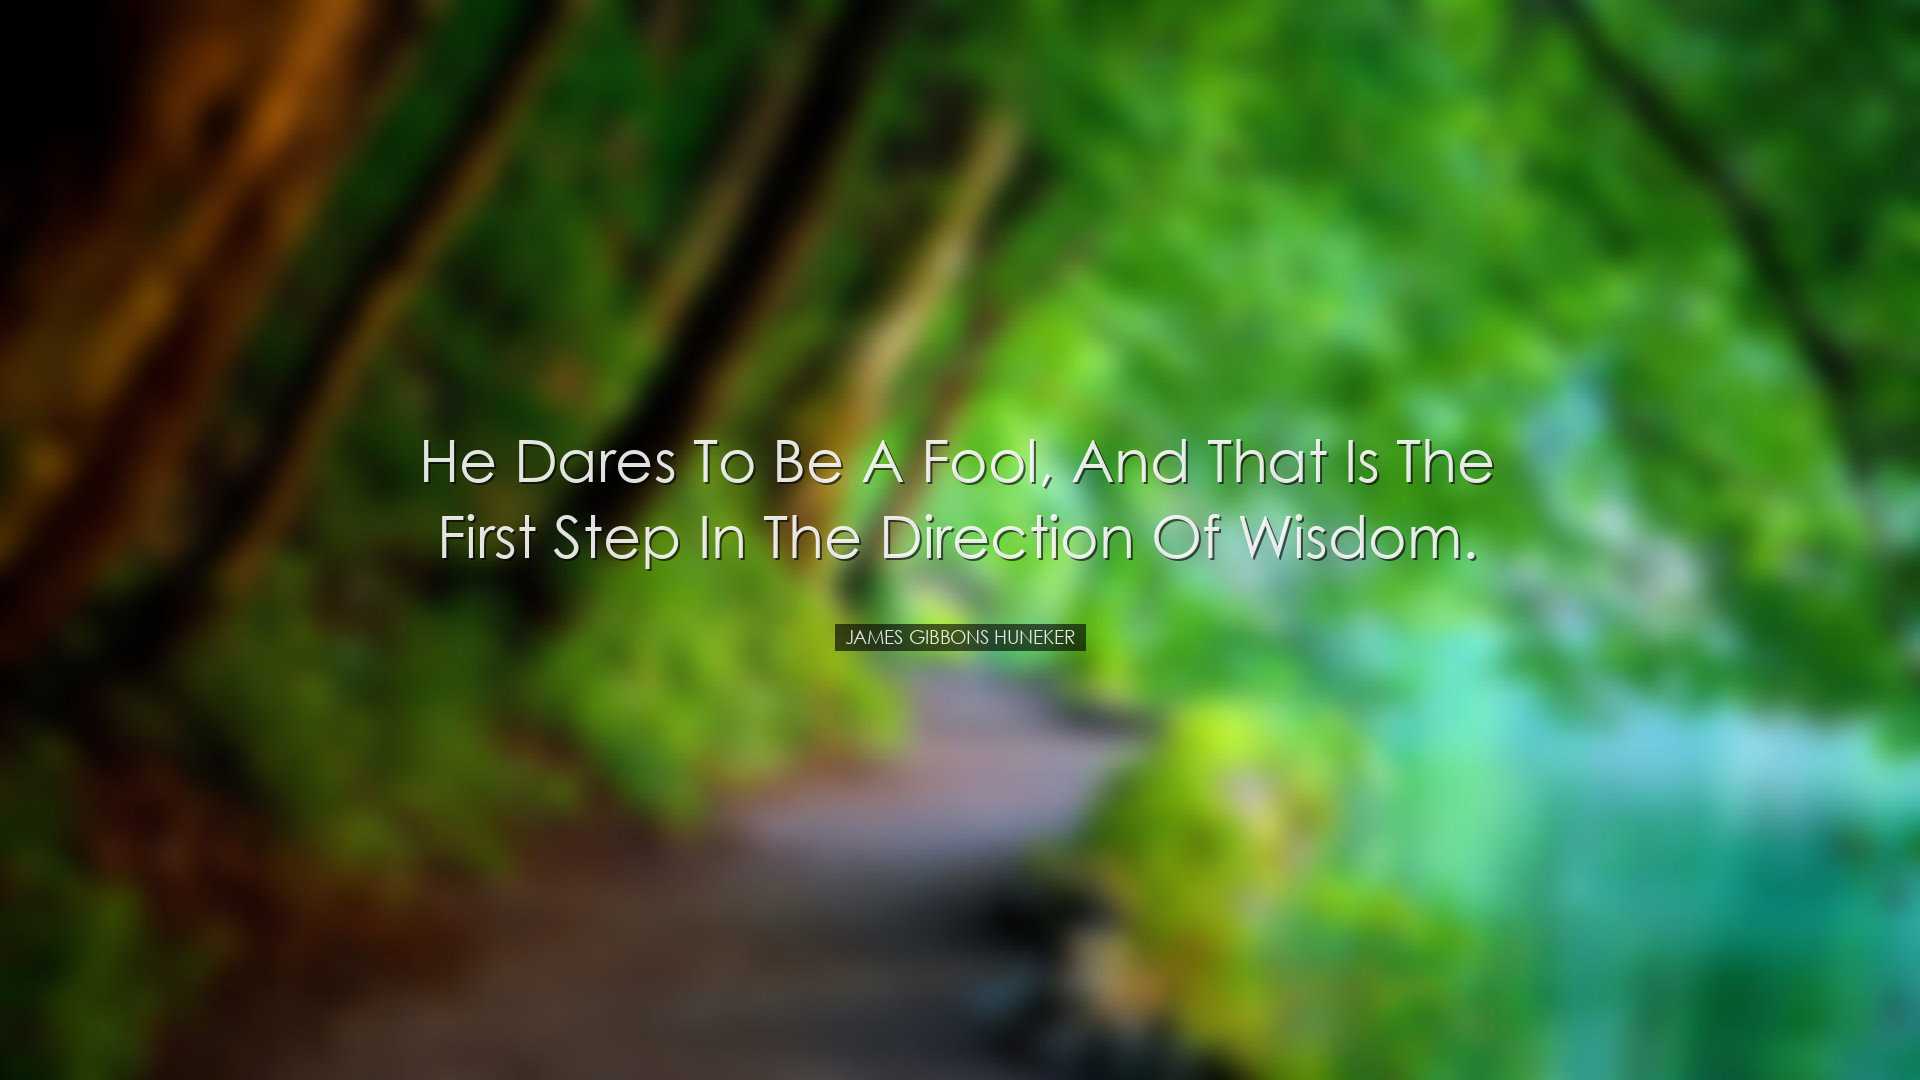 He dares to be a fool, and that is the first step in the direction